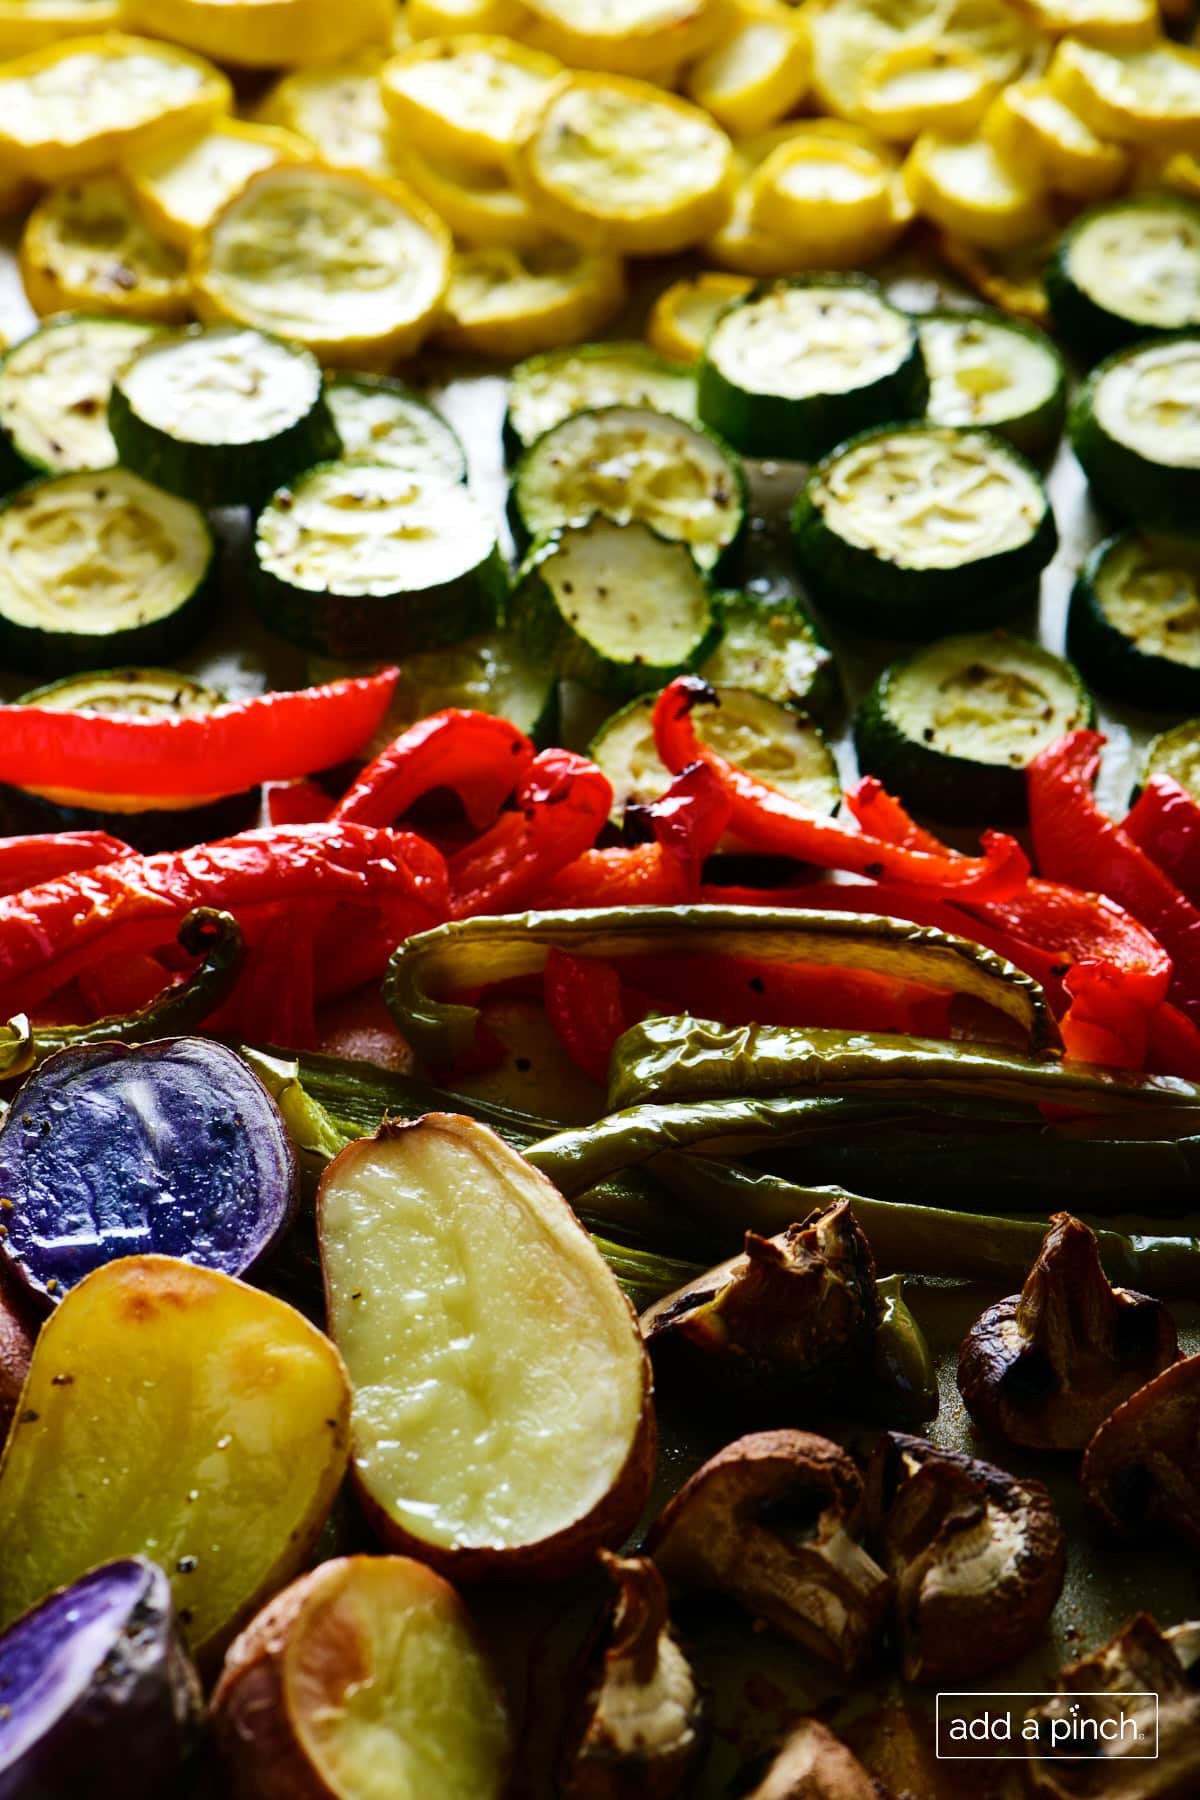 Oven roasted vegetables on a baking sheet.